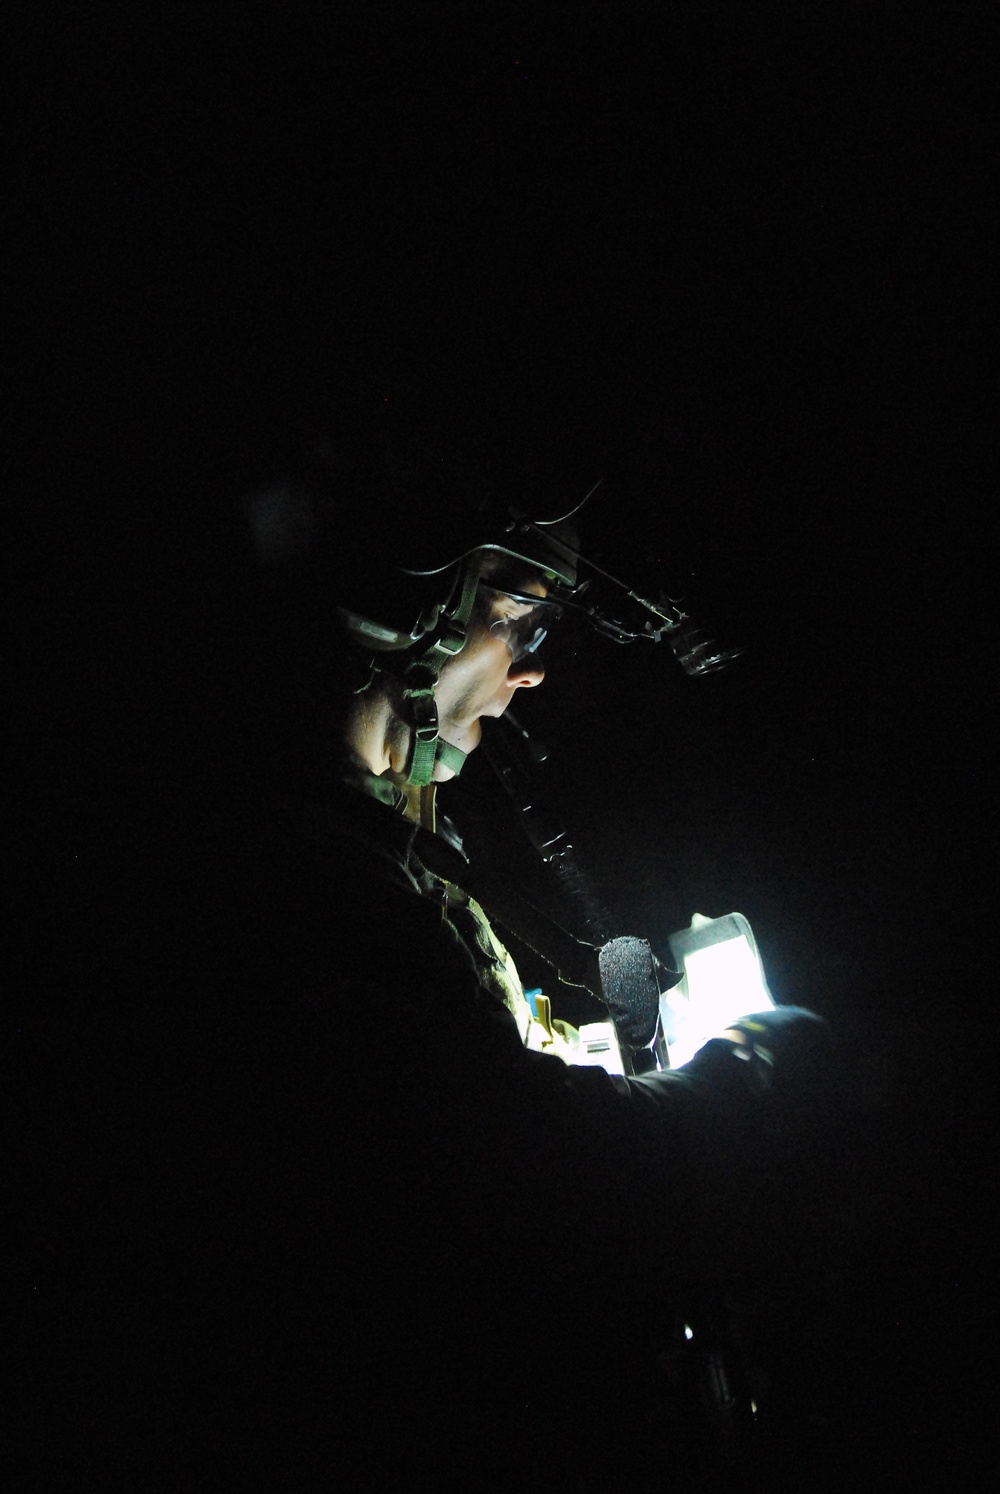 US Special Operations soldiers conduct nighttime training for Fused Response exercise